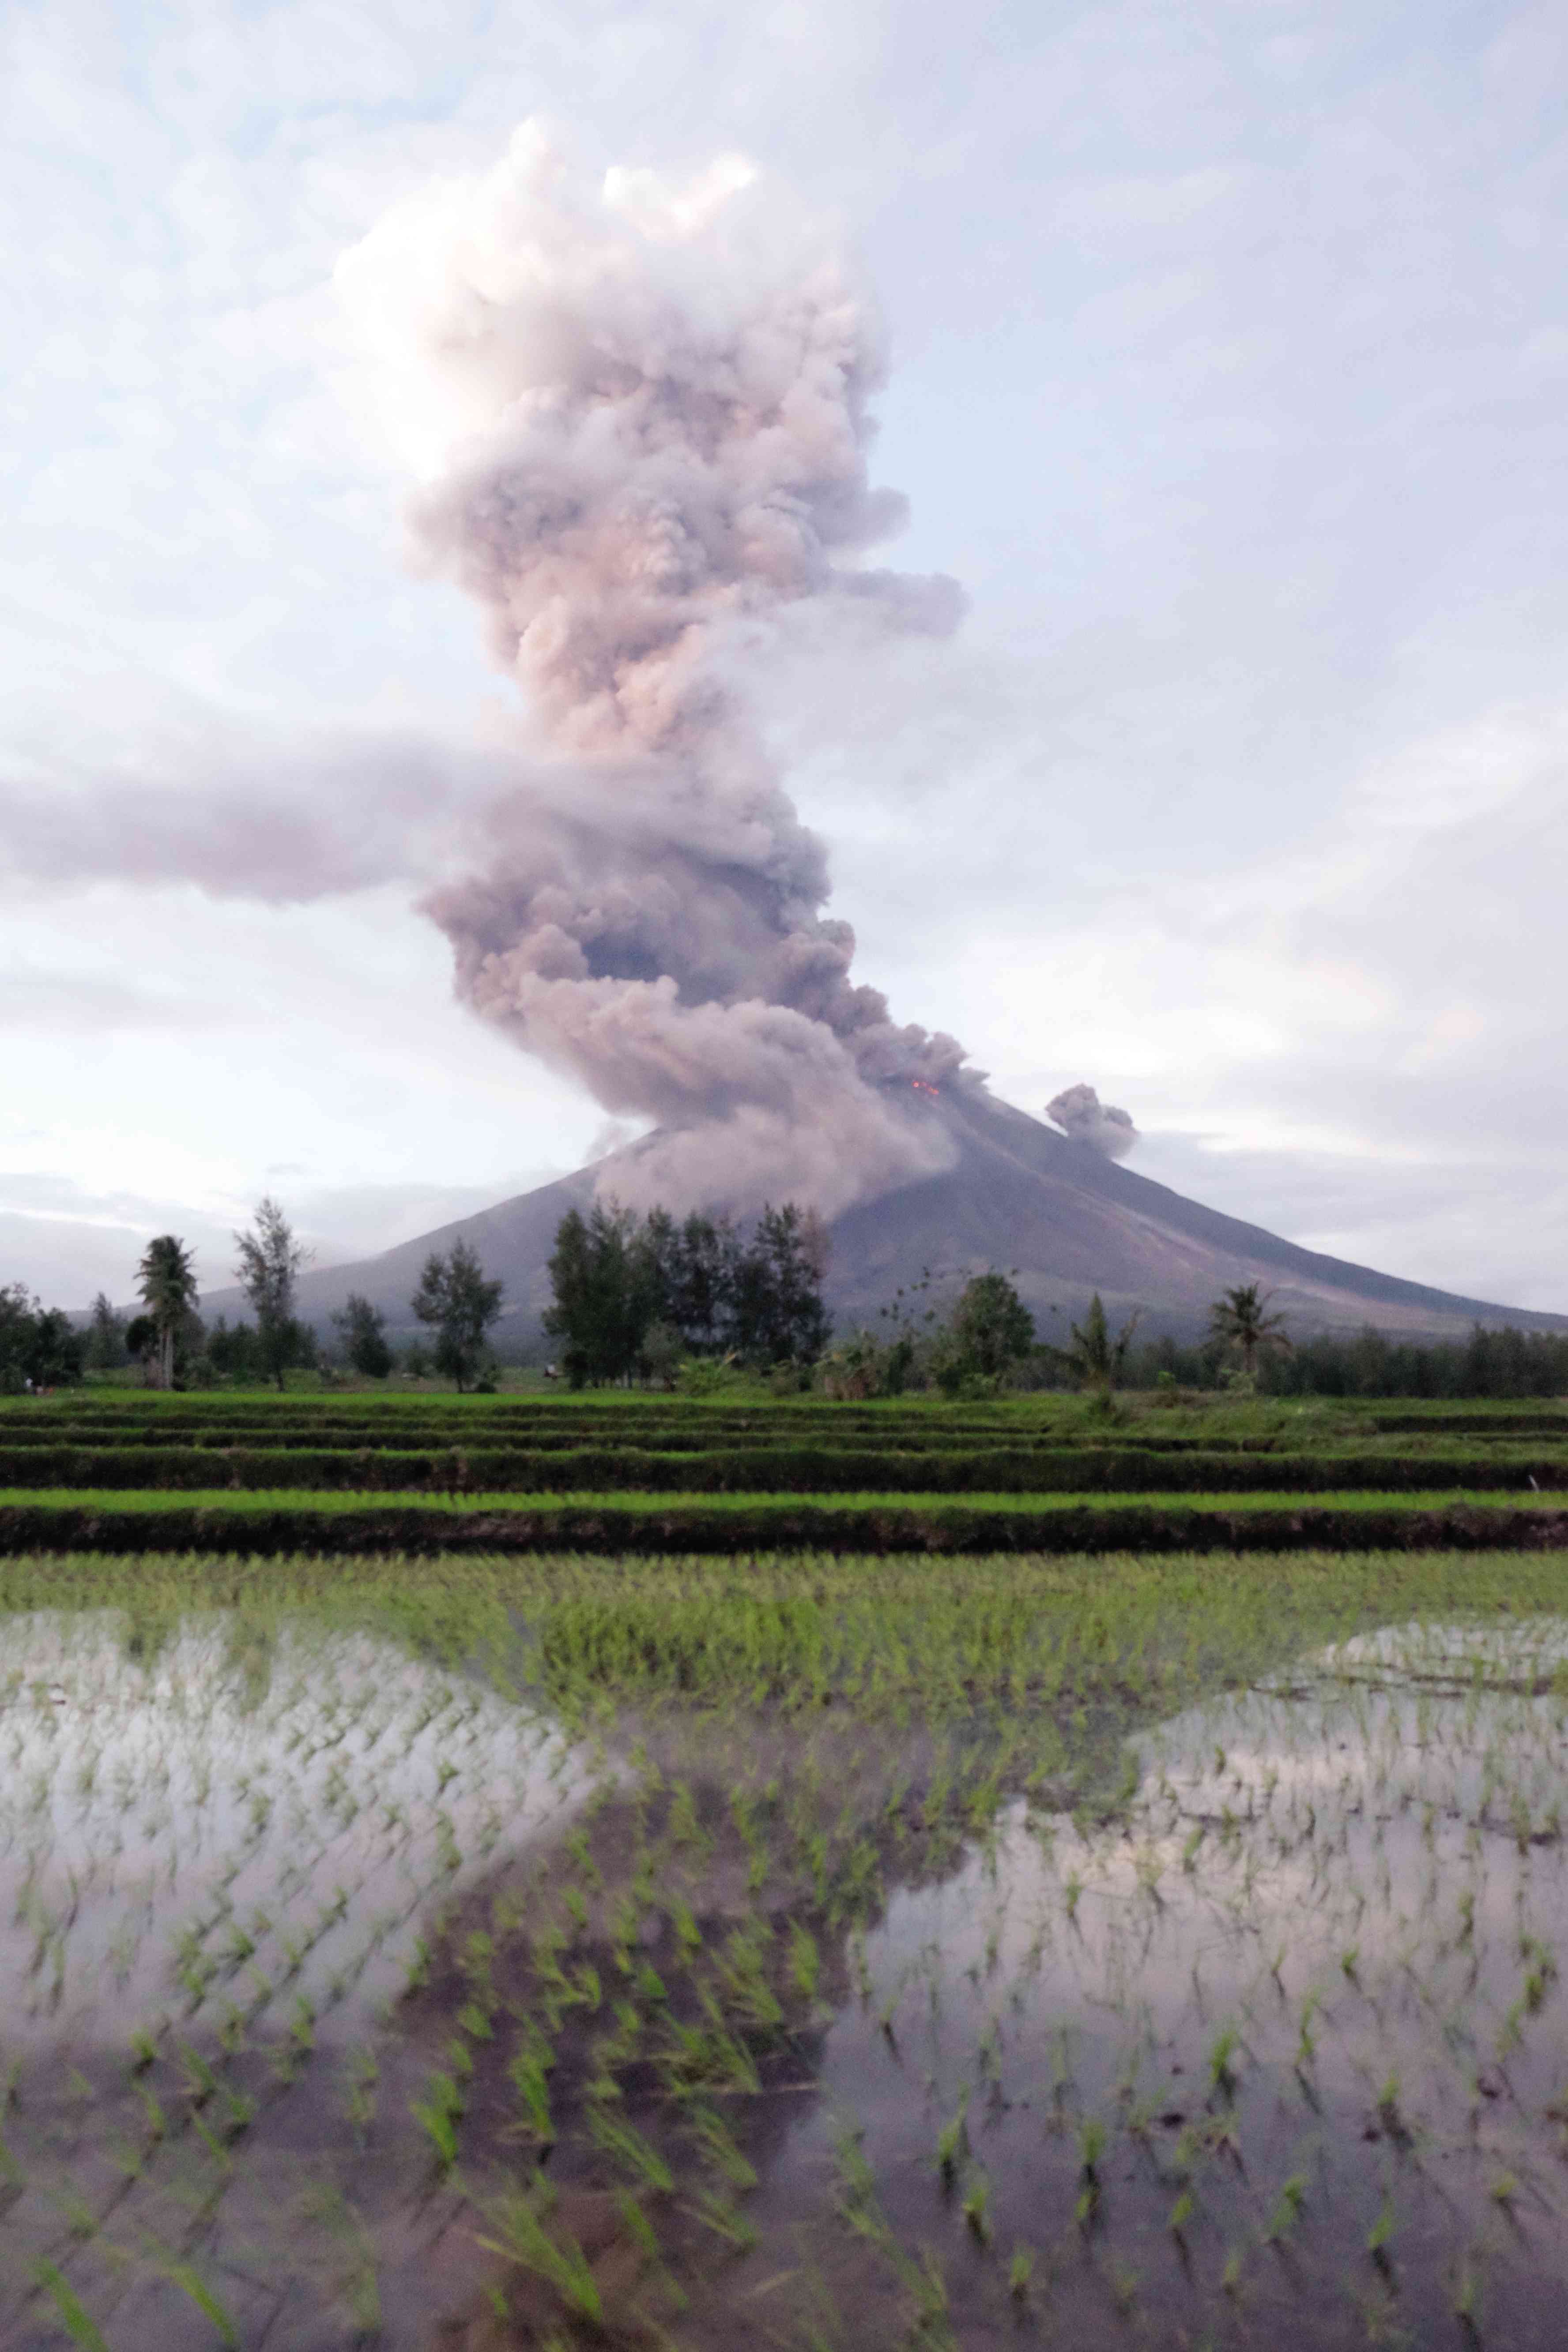 Agri damage due to Mayon ash fall reaches P190-M